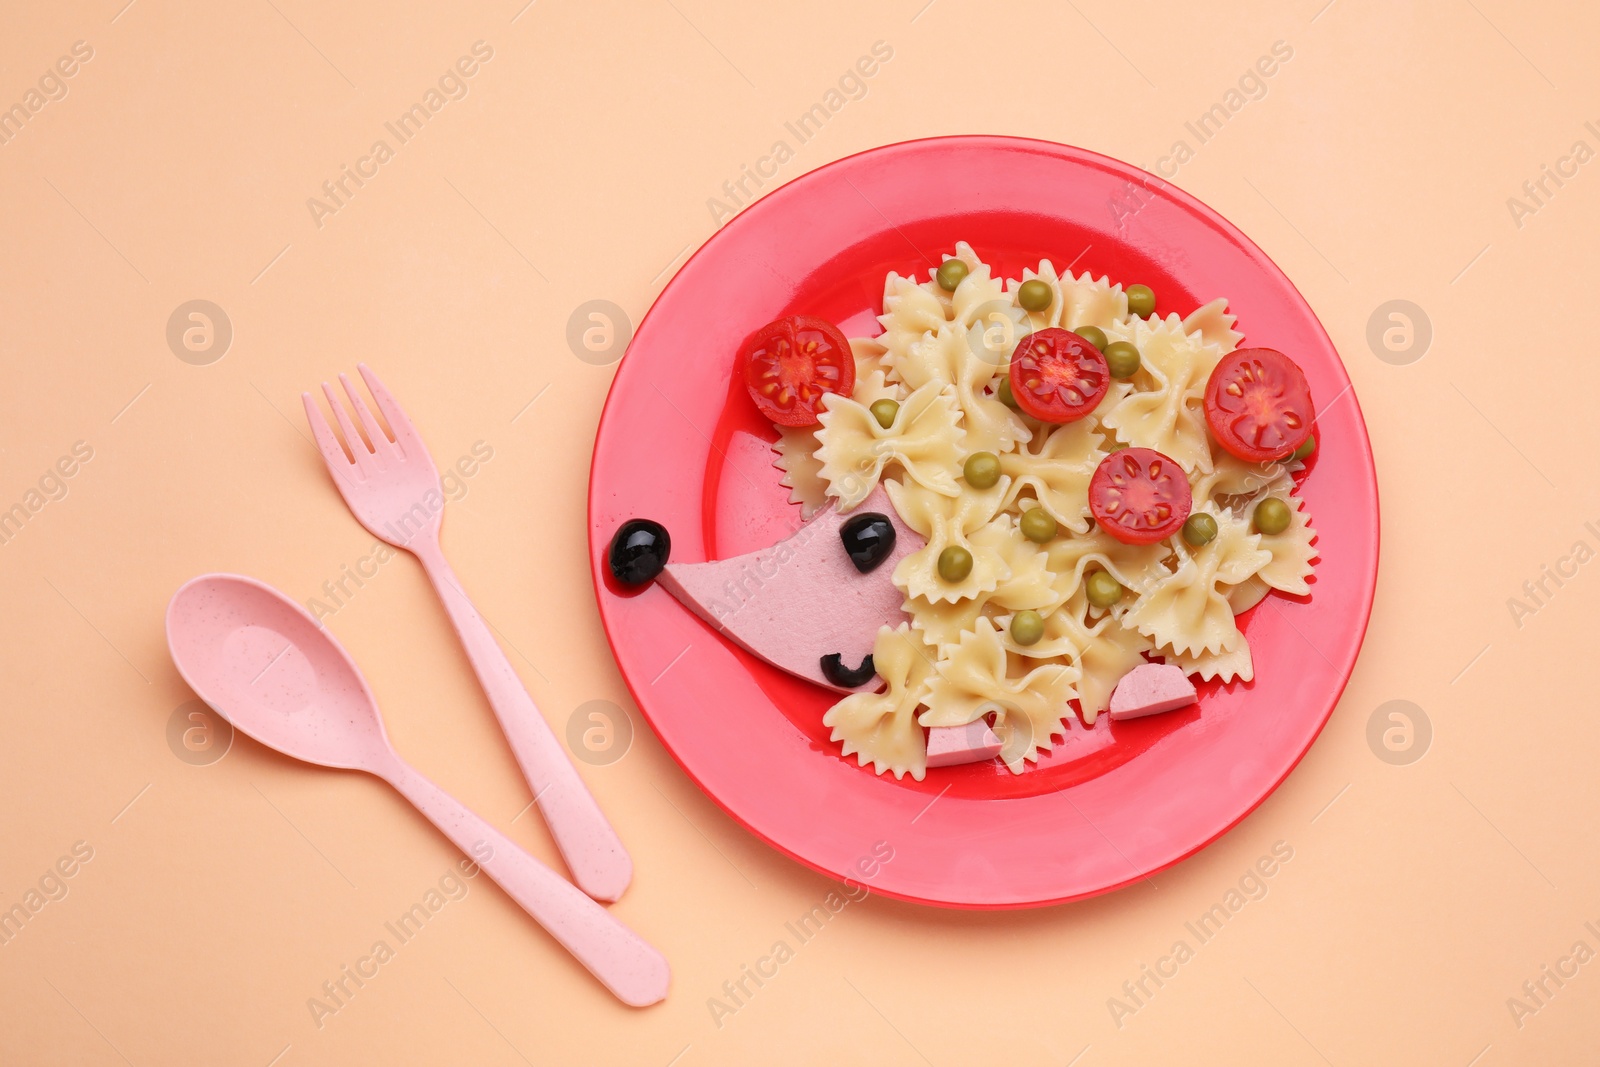 Photo of Plate with cute hedgehog made of delicious pasta, sausages and tomatoes on pale orange table, flat lay. Creative serving for kids